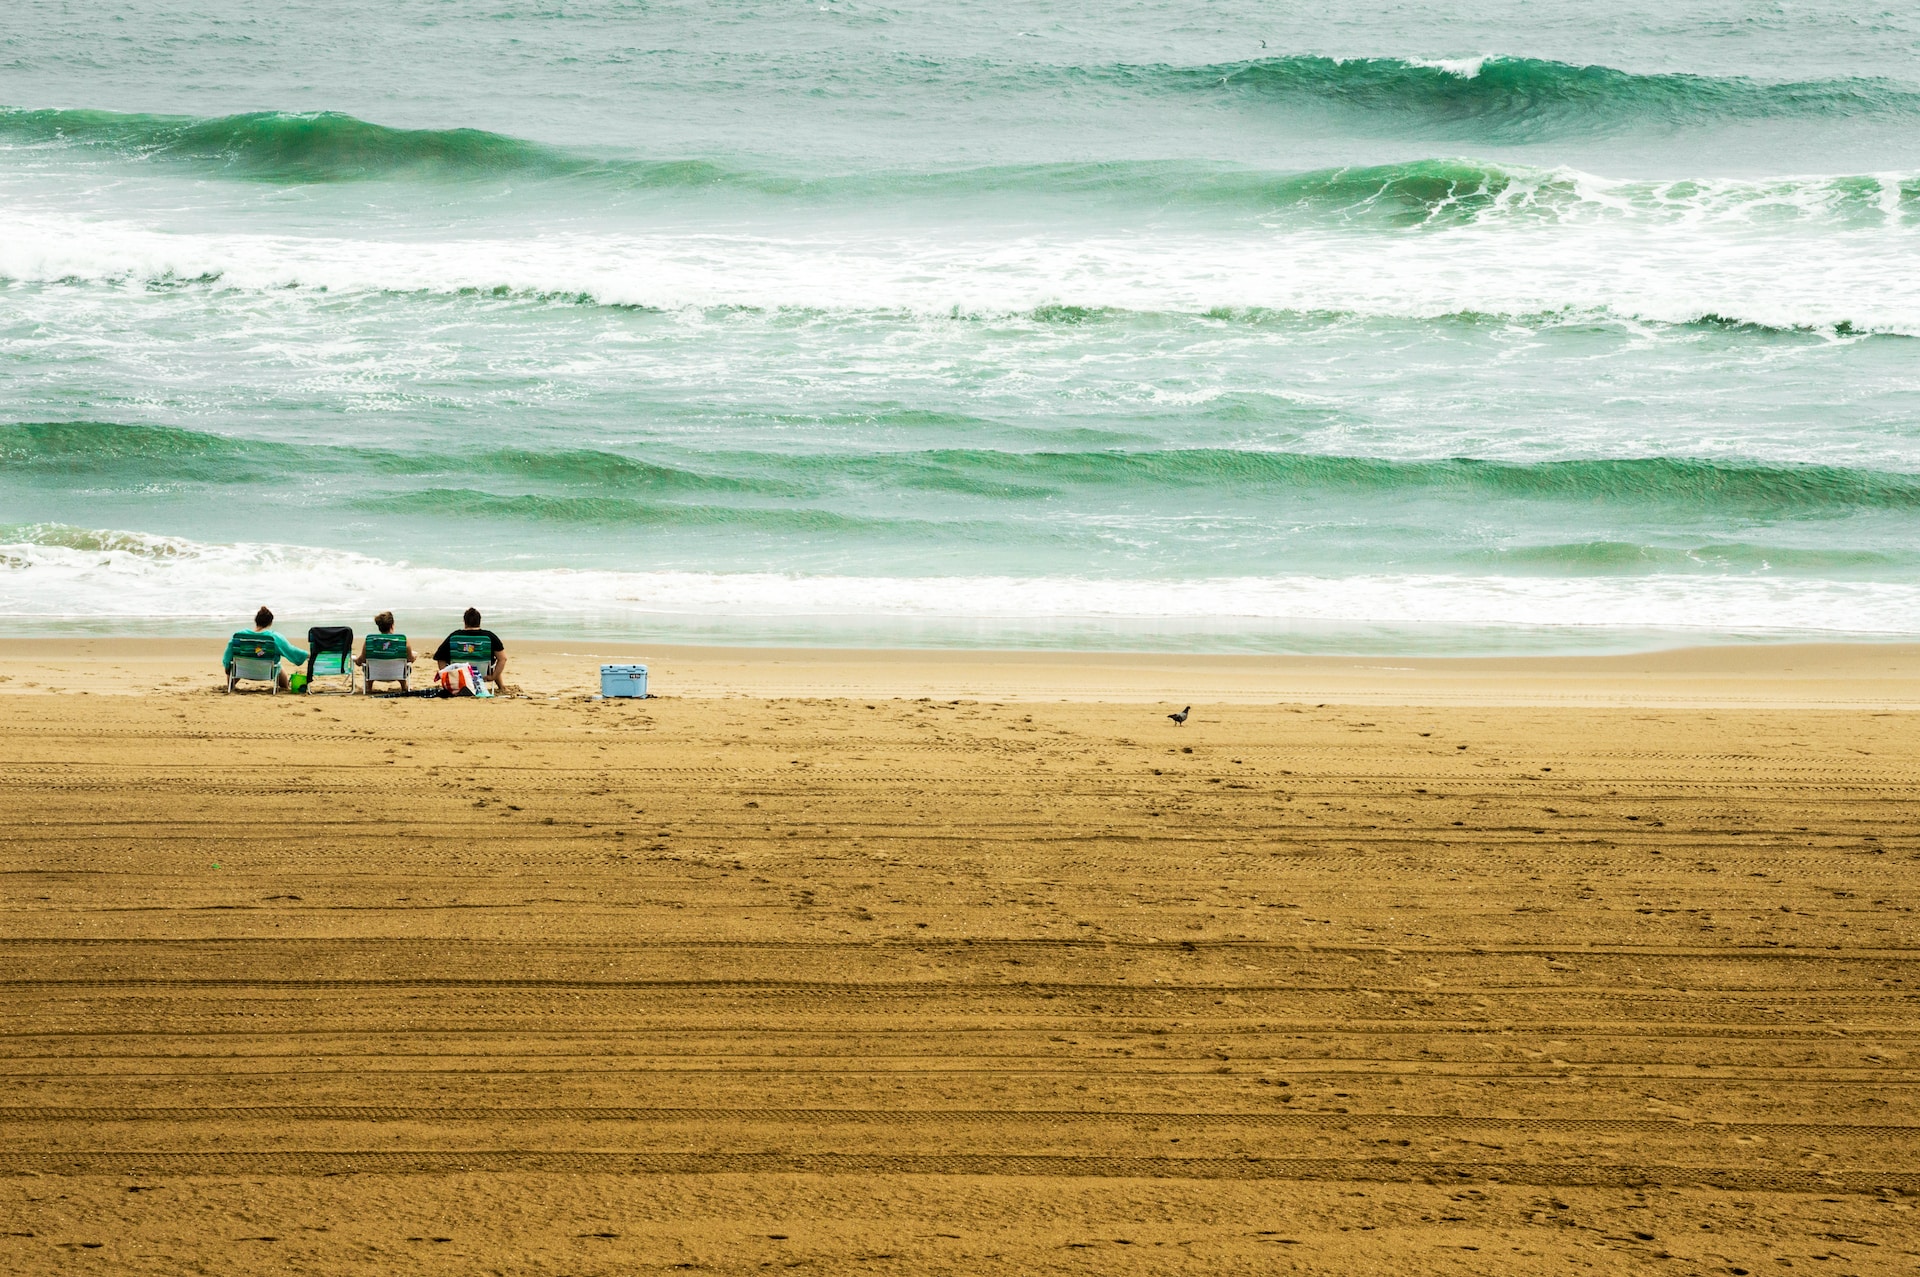 A family takes to the beach early in the morning to beat the crowds and watch the waves roll in.